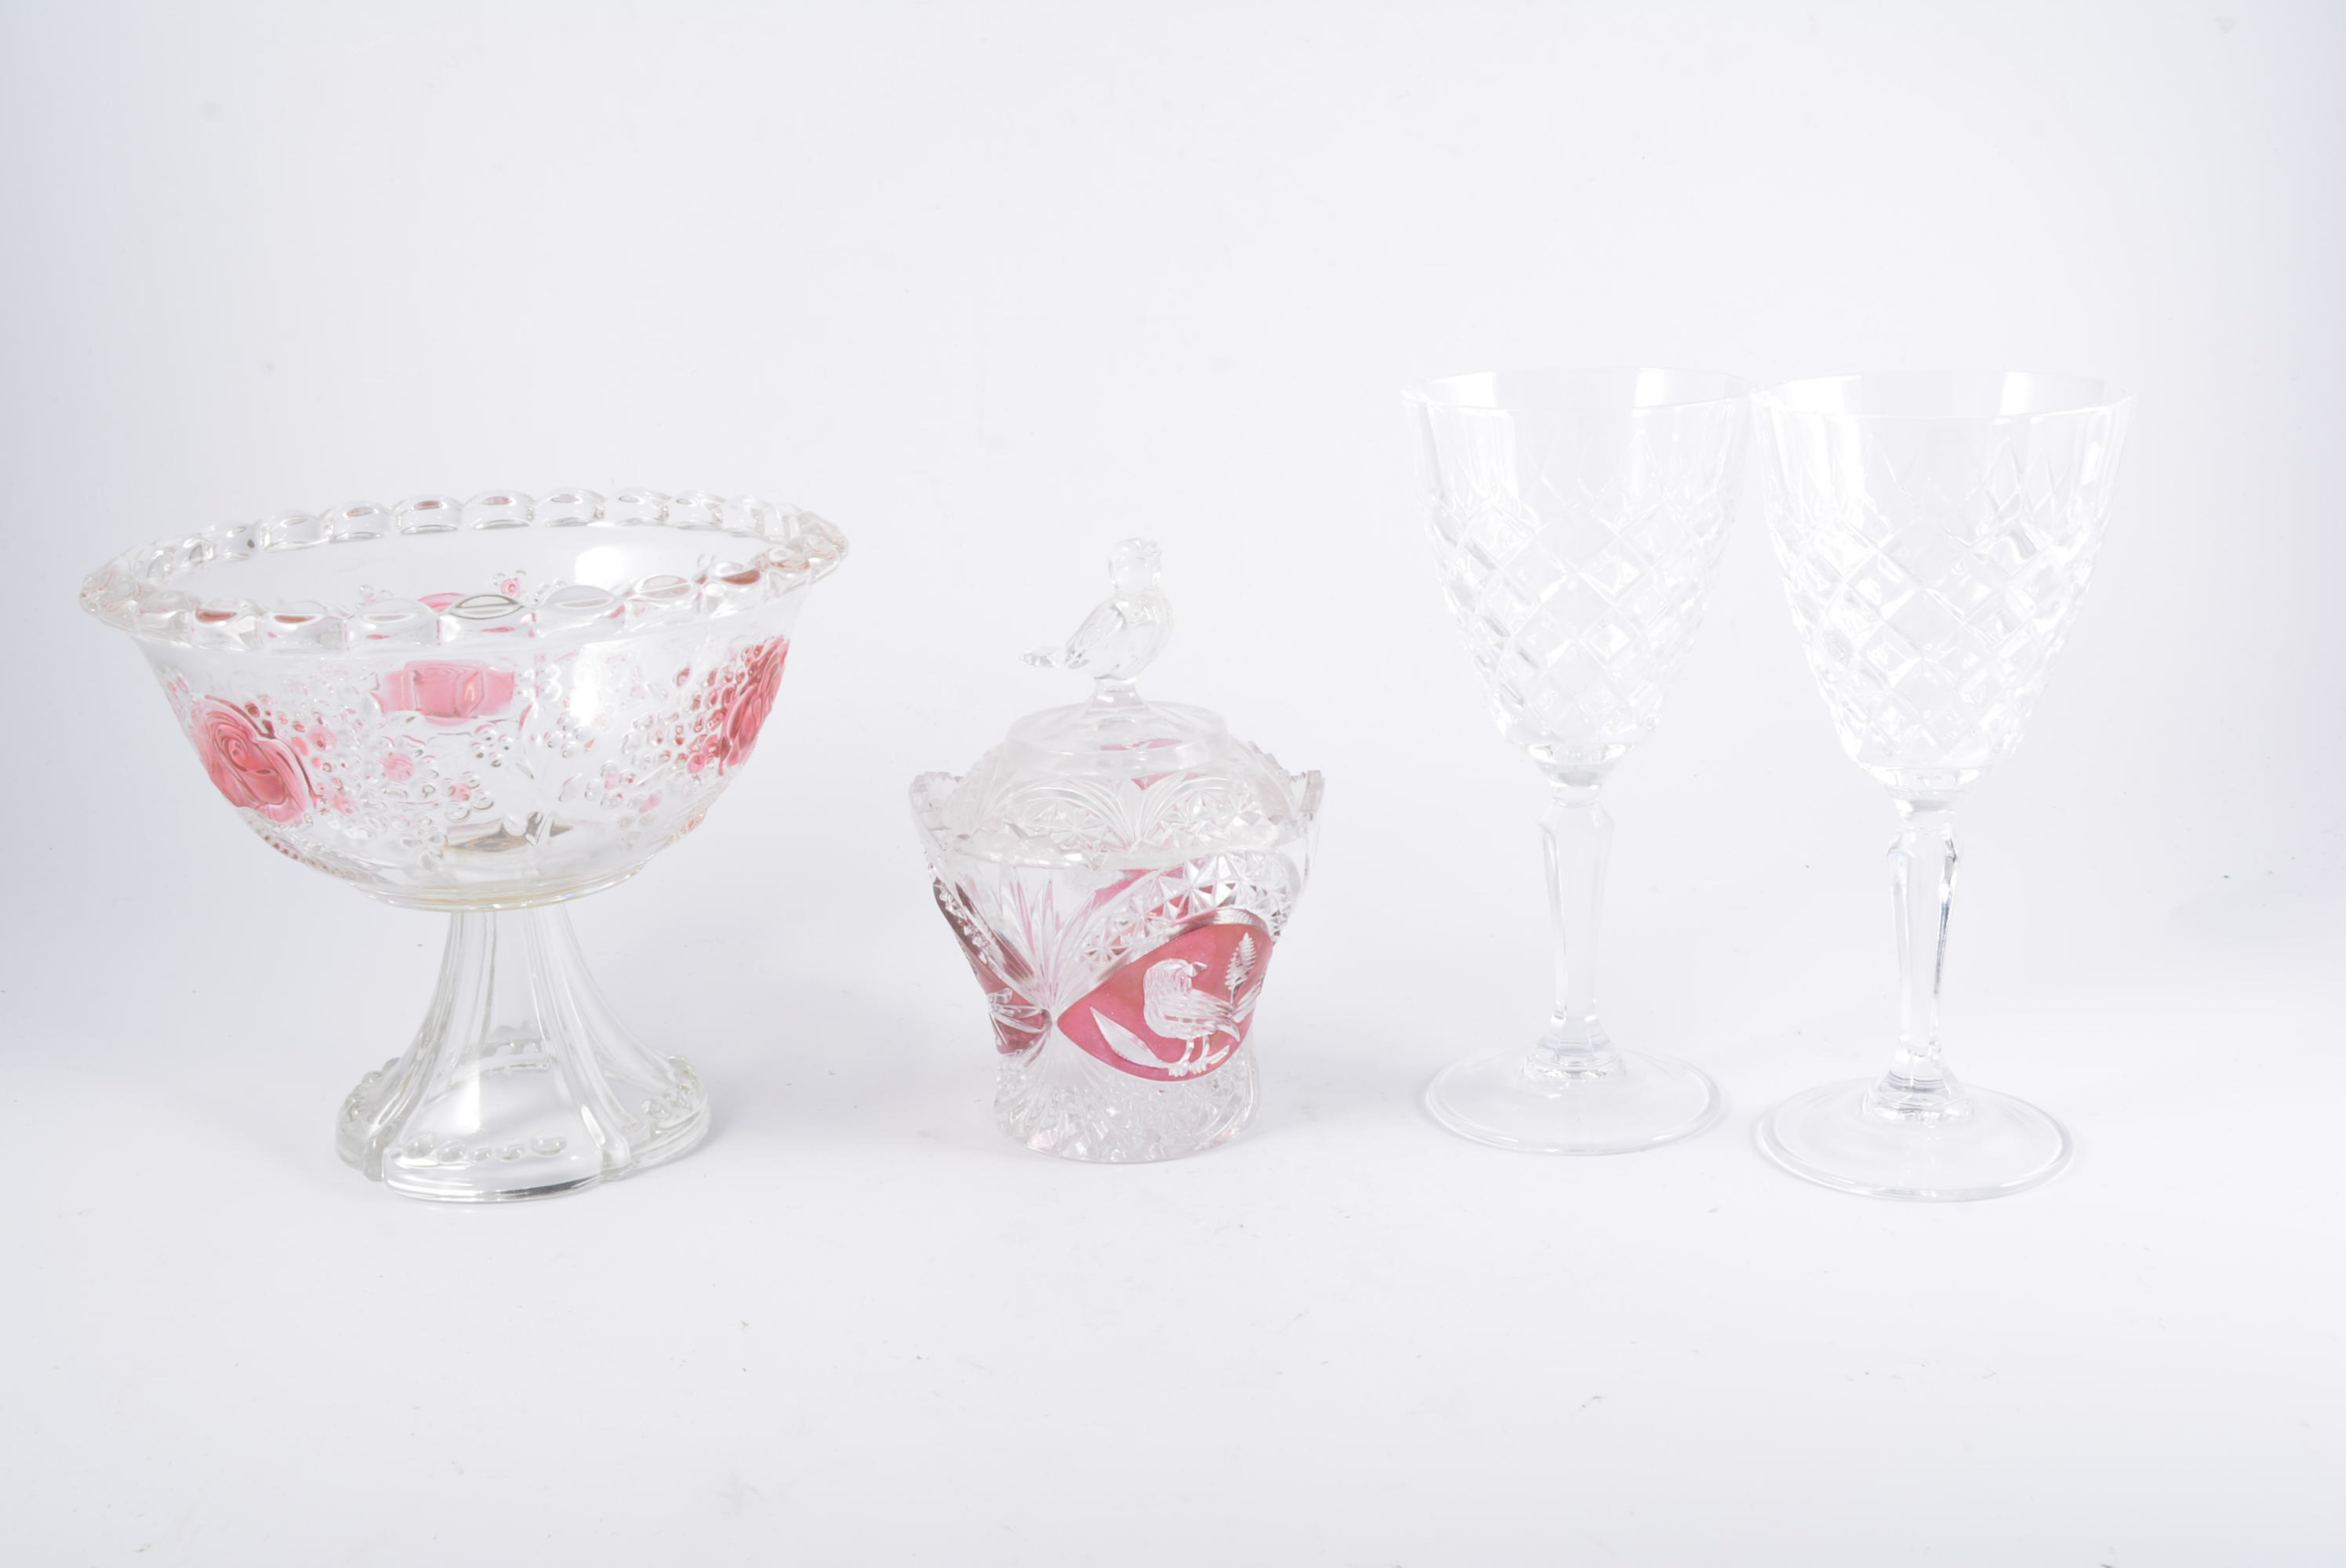 Small collection of decorative glass vases, drinking glasses, etc.